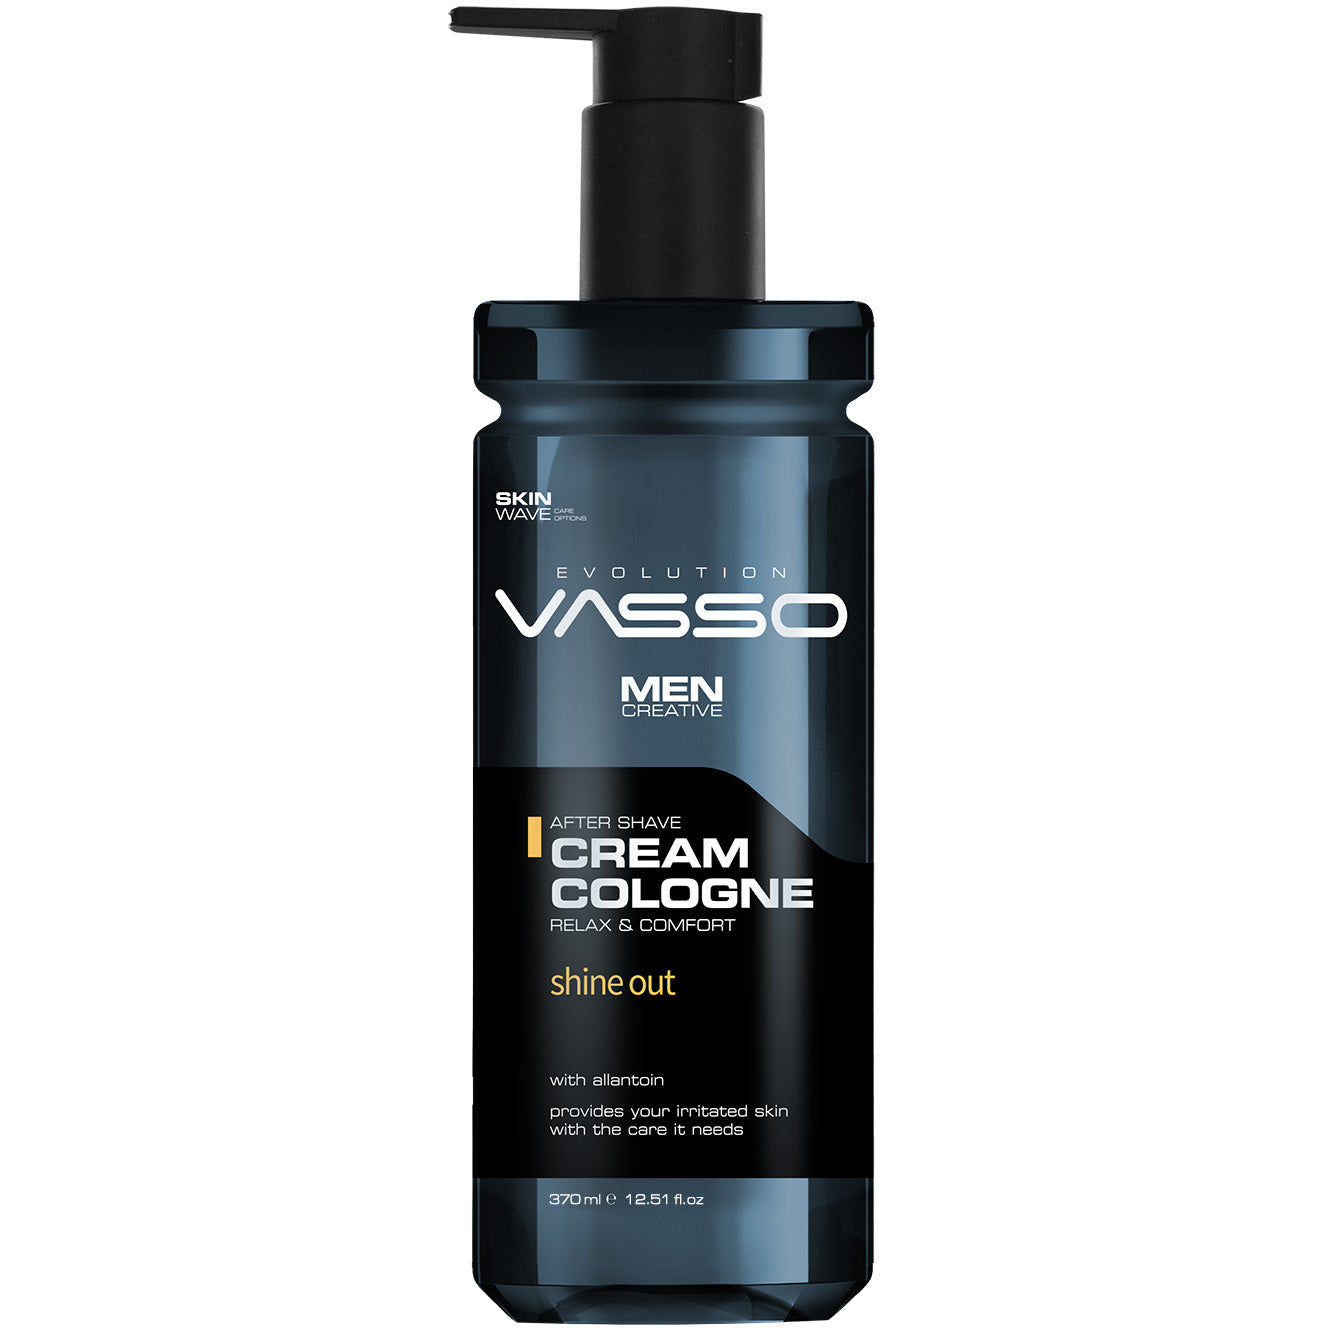 vasso after shave cream cologne shineout